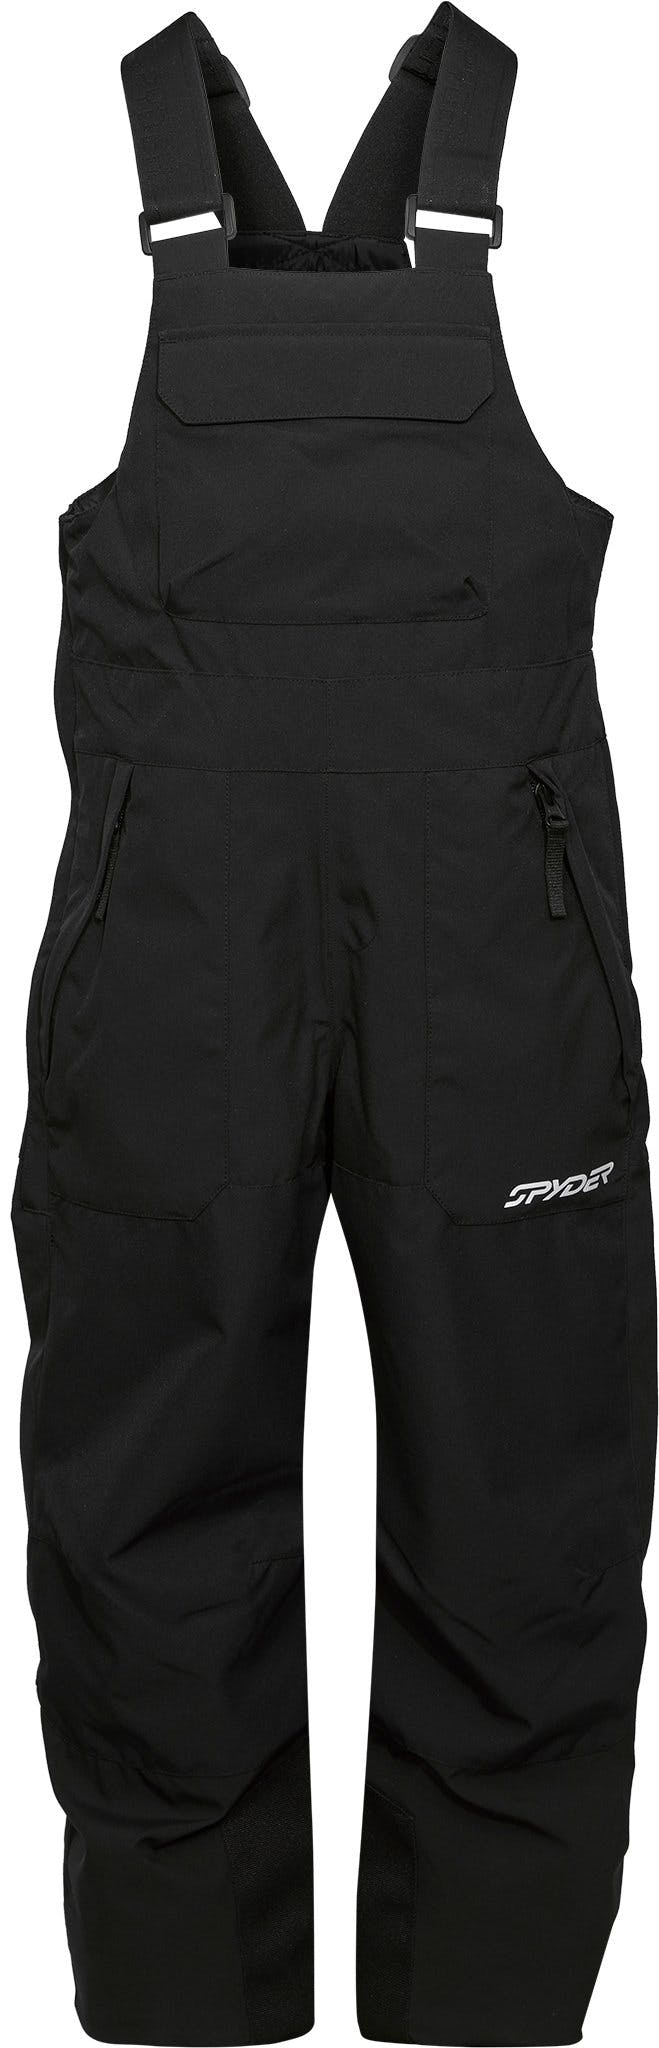 Product image for Scout Bib Pants - Youth